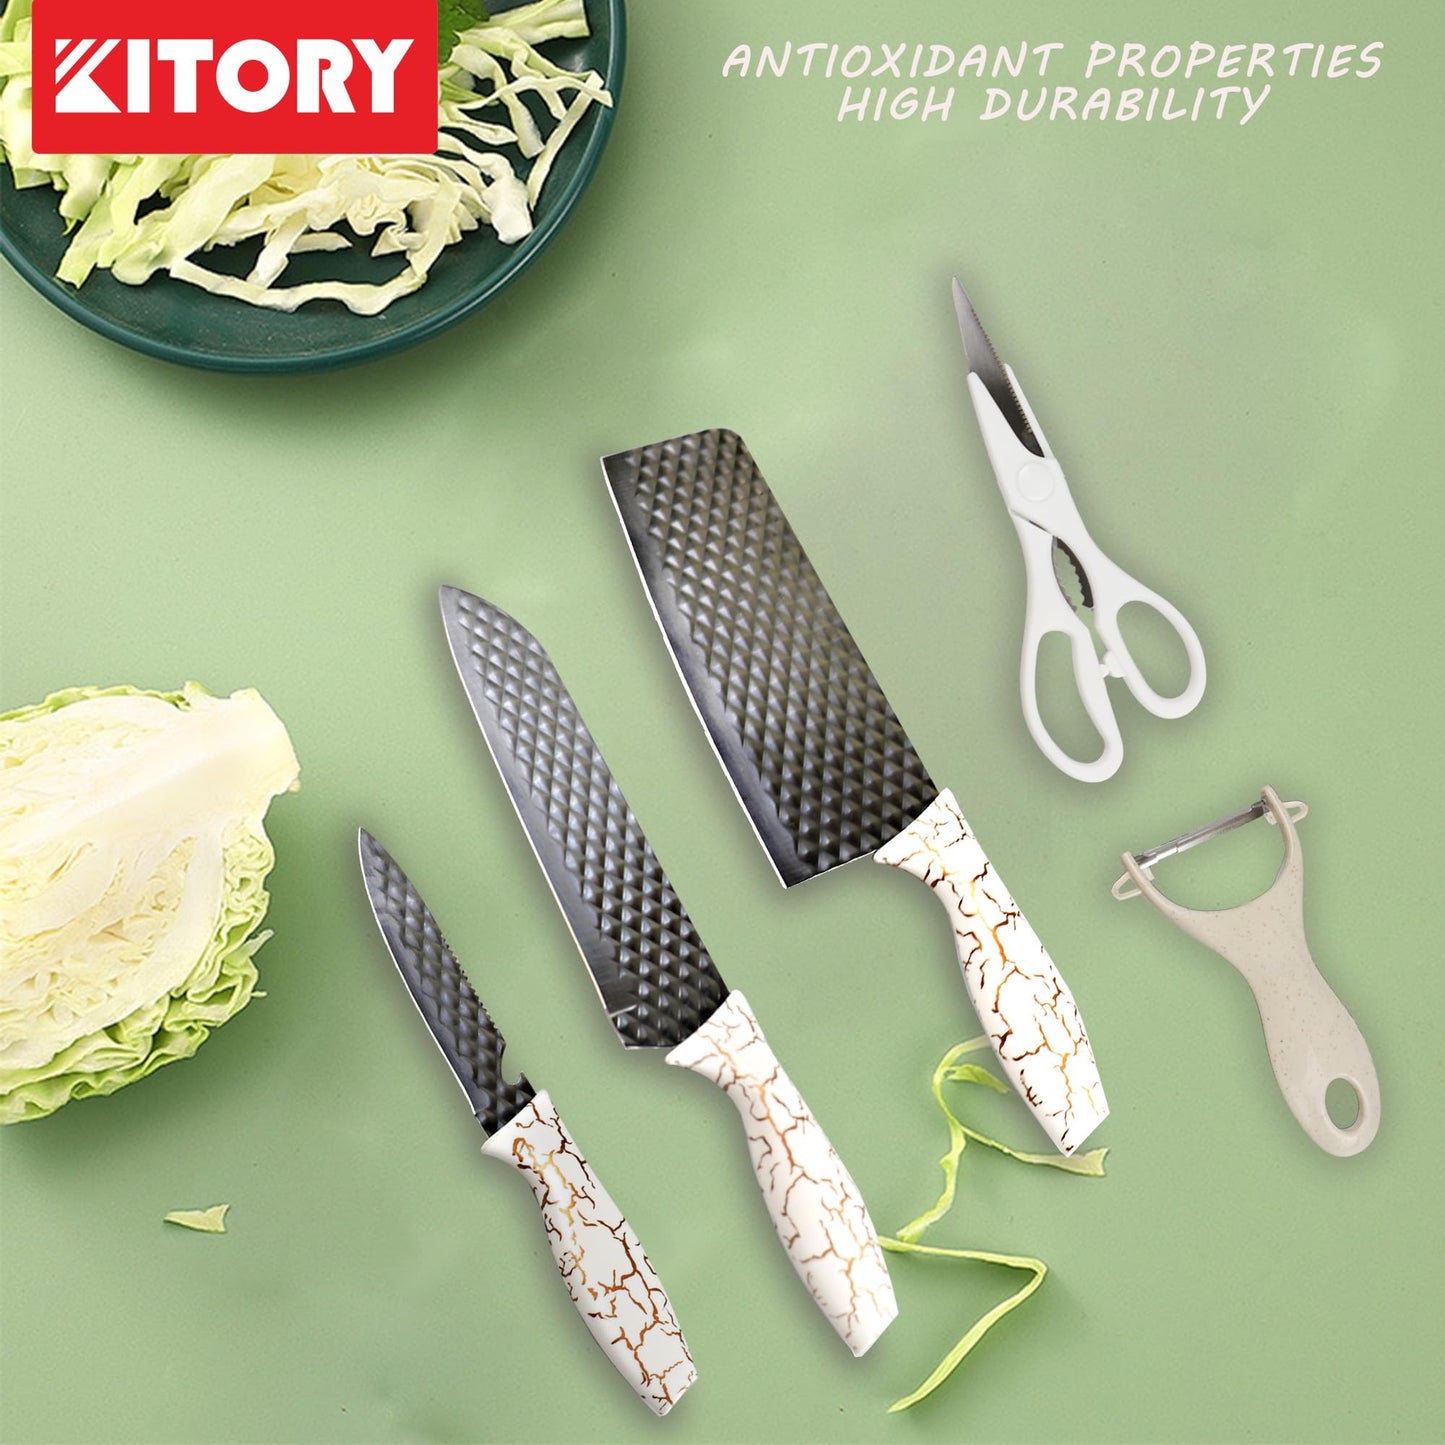 Kitory 6 Piece Cleaver Knife Set with Knife Block, White